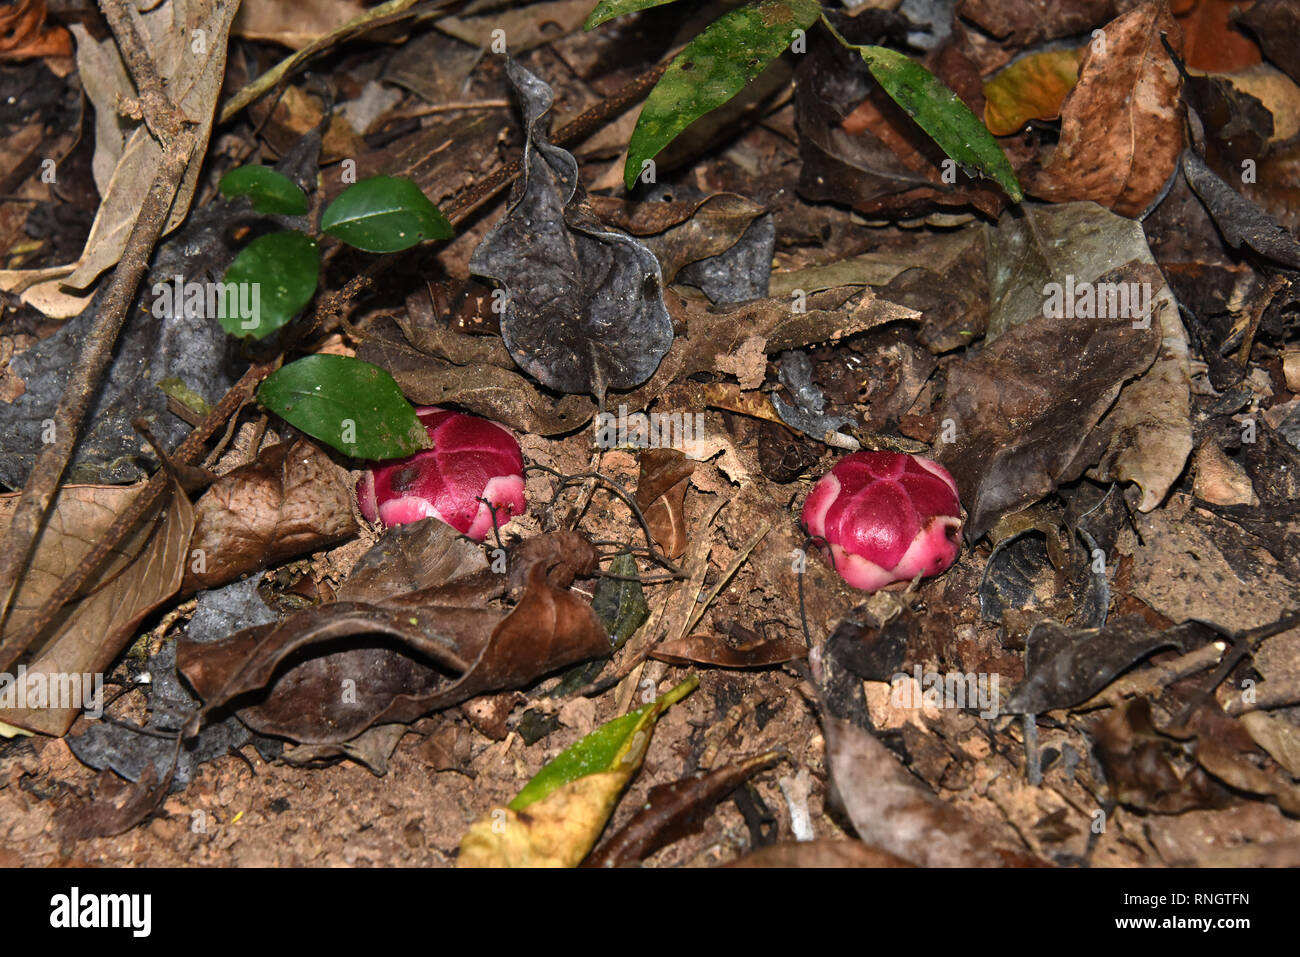 Two young flower buds of Sapria gan - a parasitic flowering plant on the forest floor in Thailand Stock Photo